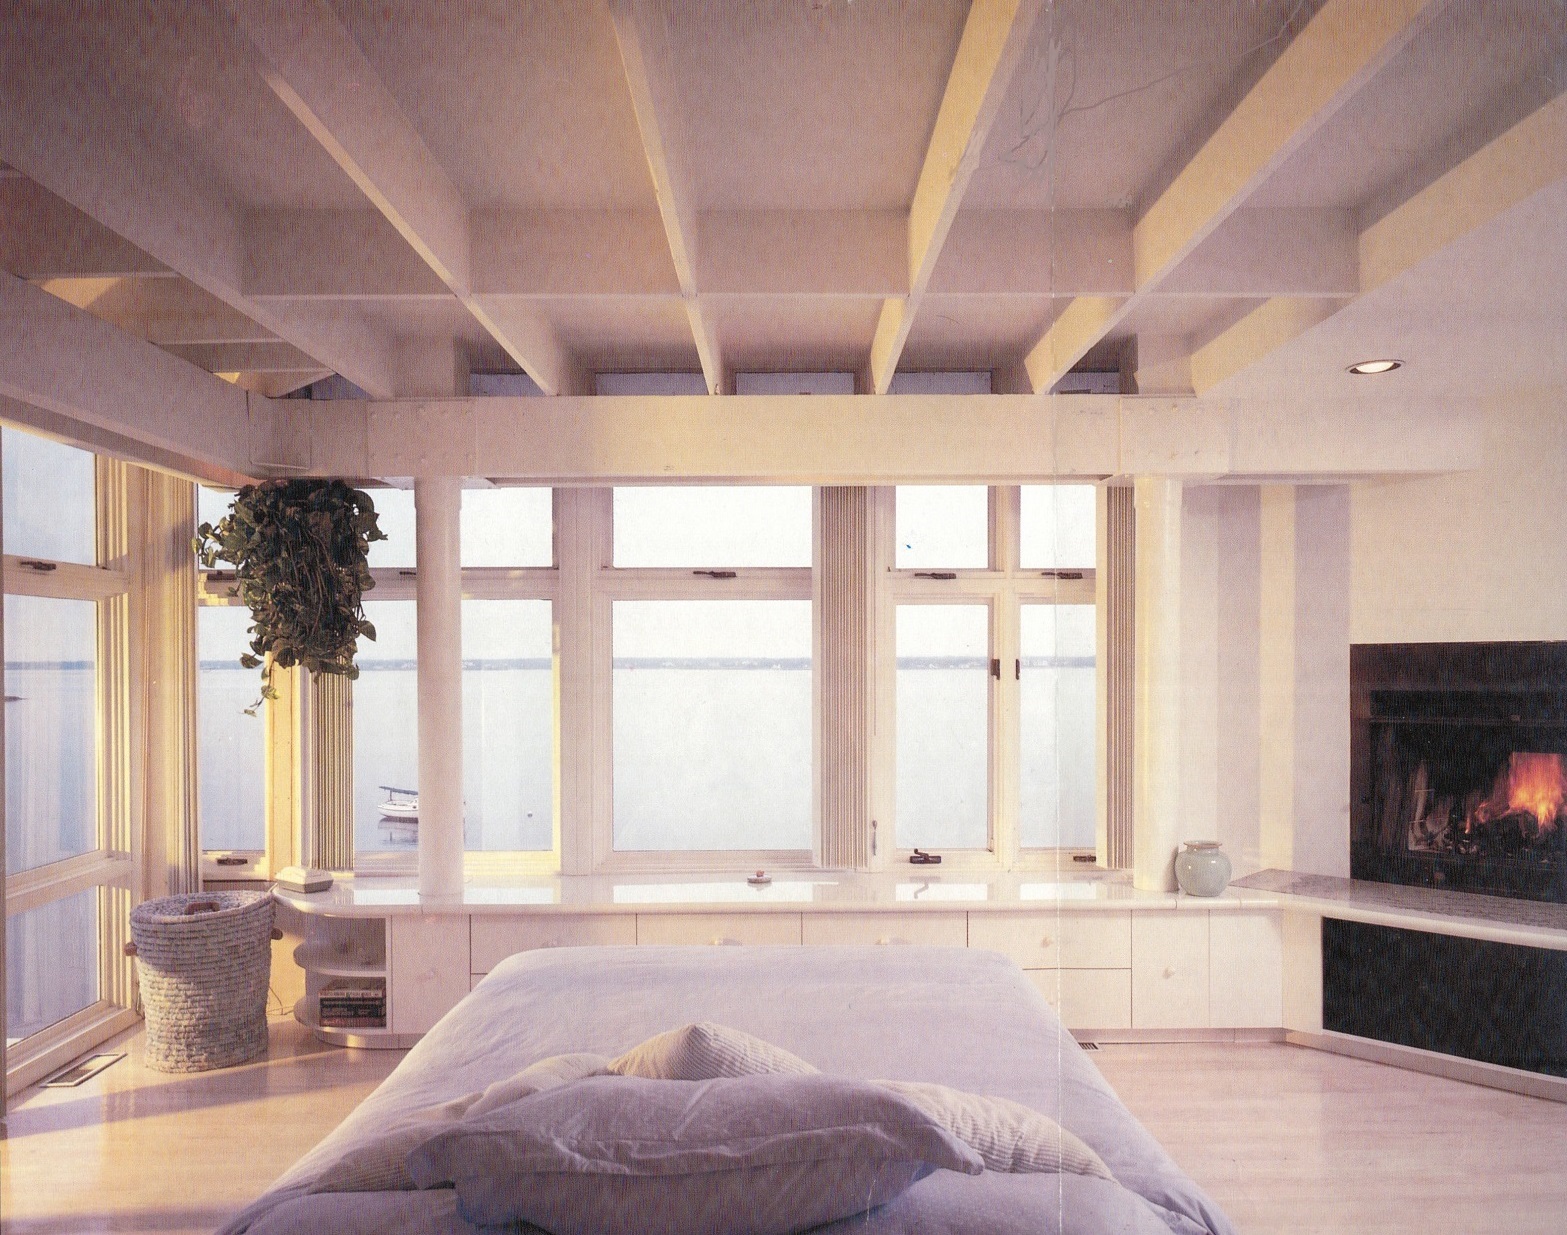 Architectural residential design of added master bedroom fireplace, cabinetry and water view.